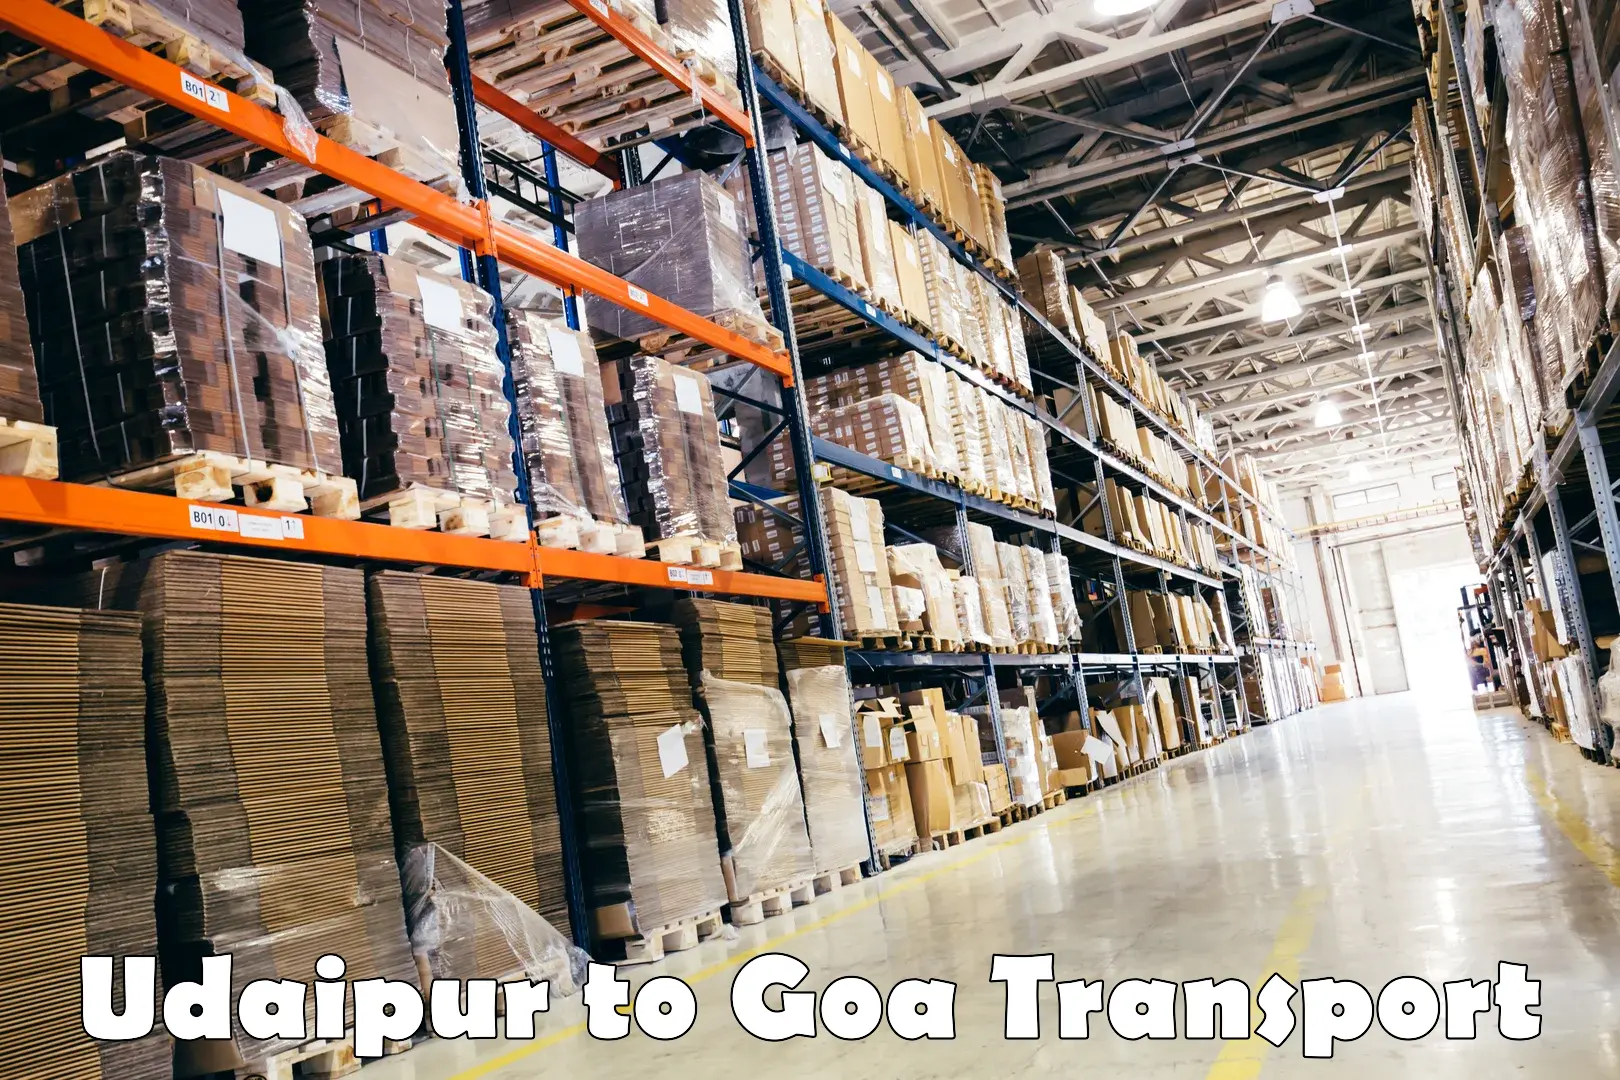 Transport bike from one state to another Udaipur to Goa University